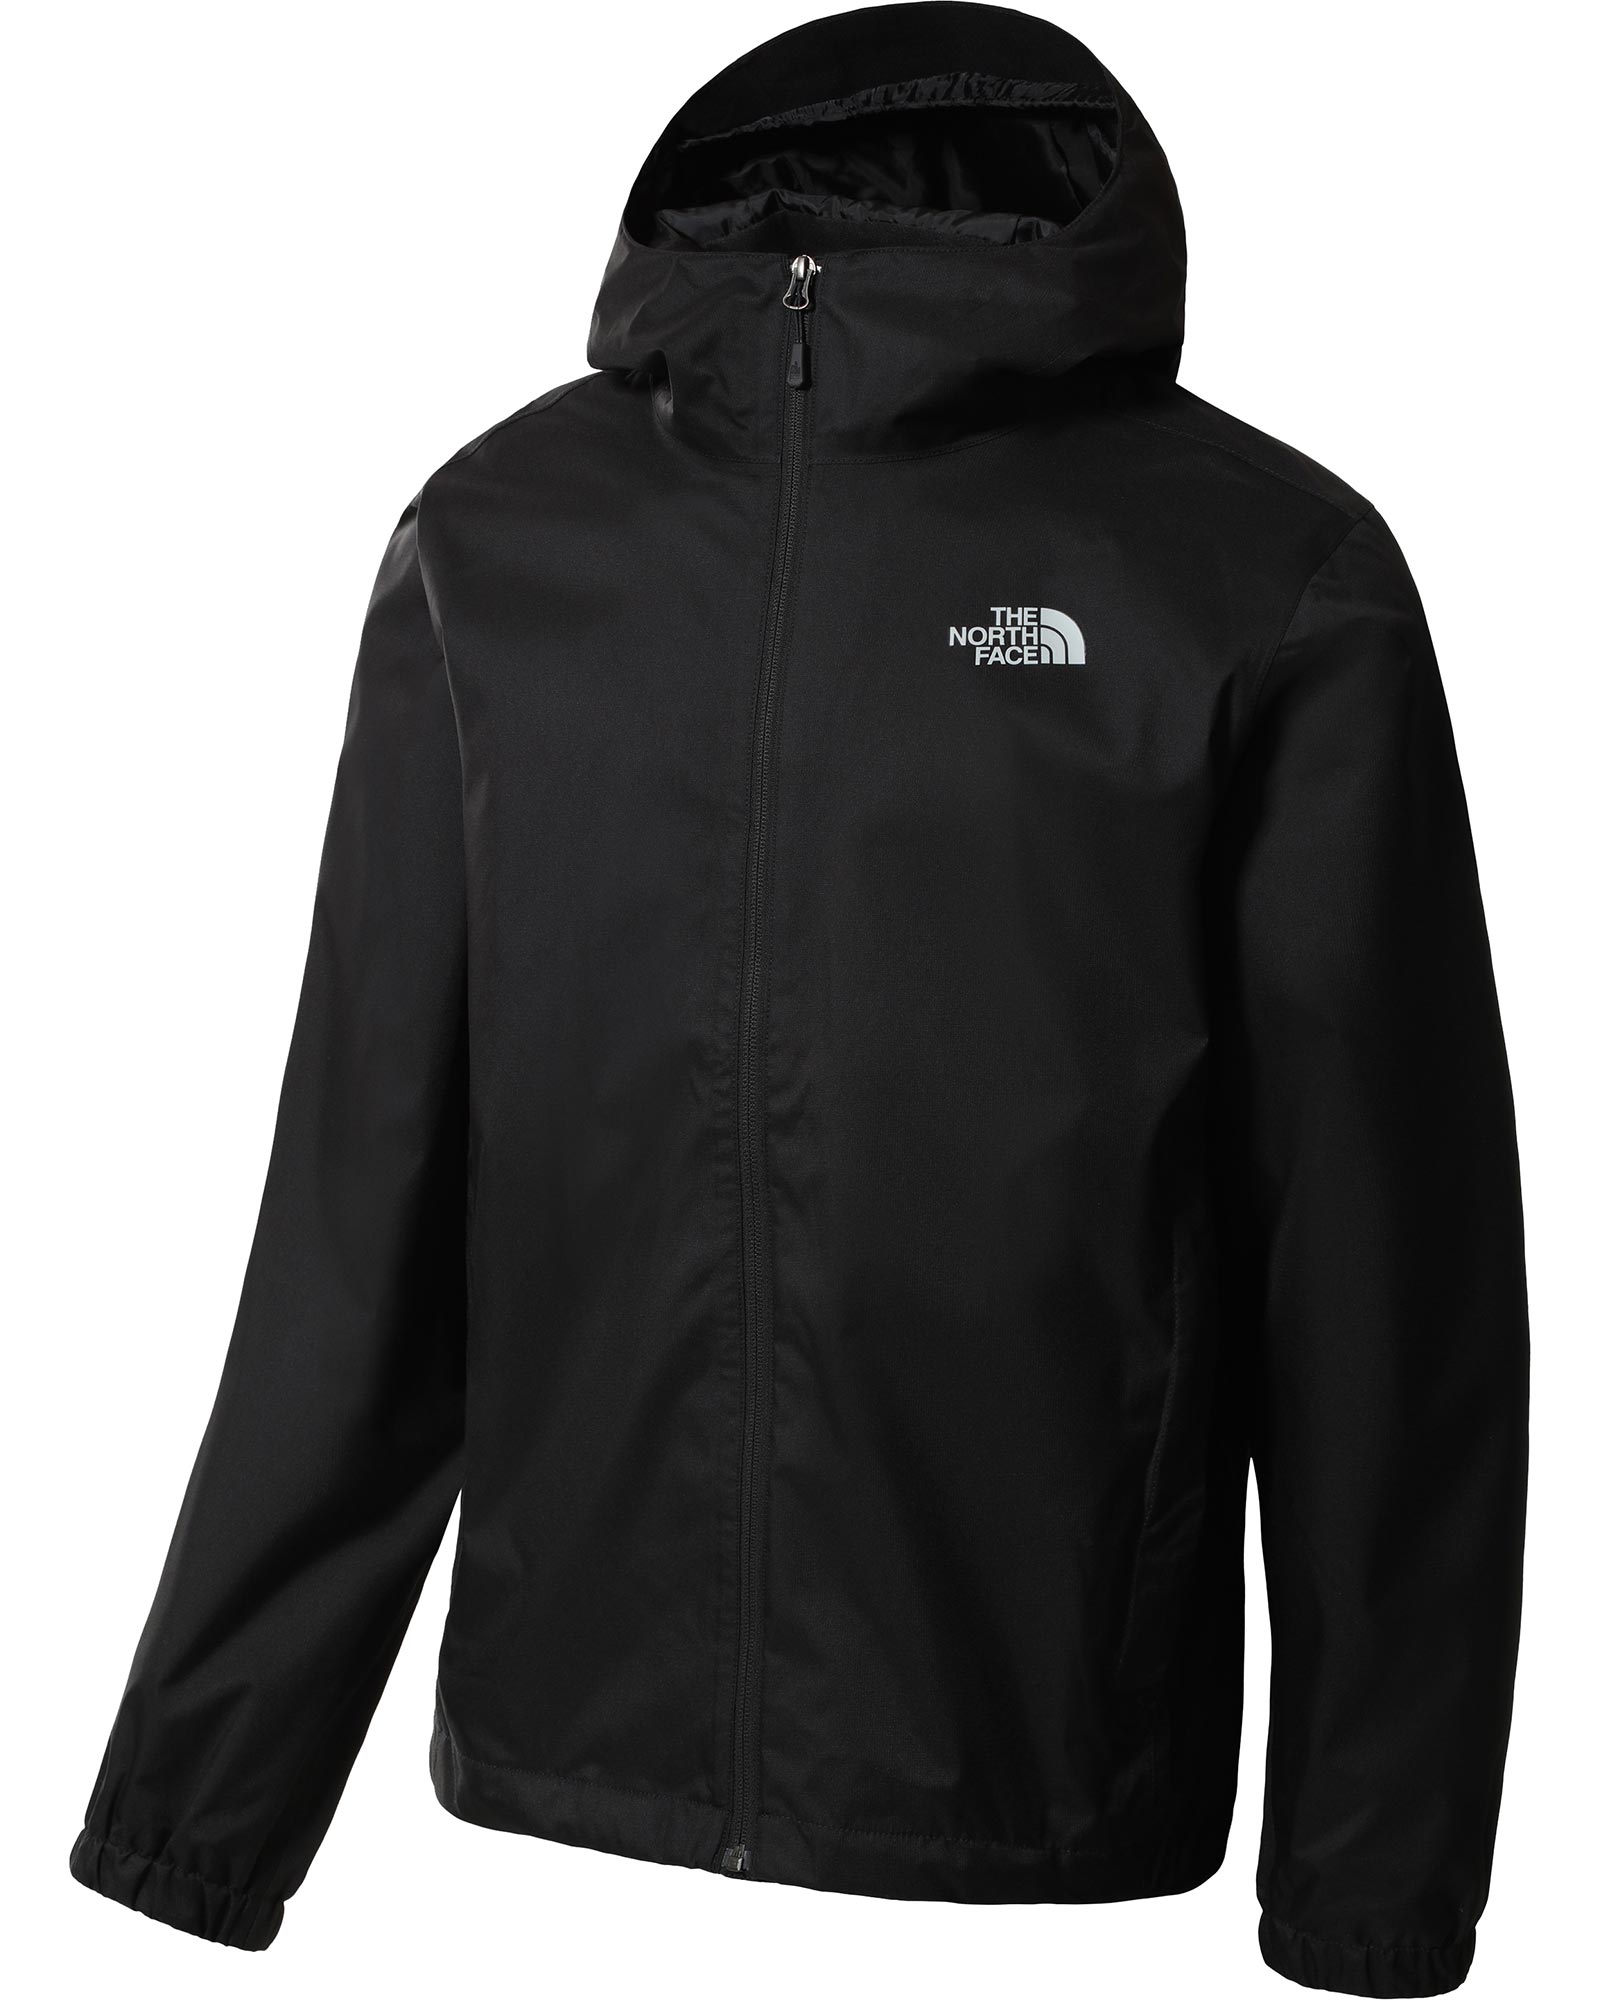 The North Face Quest DryVent Men’s Jacket - TNF Black S